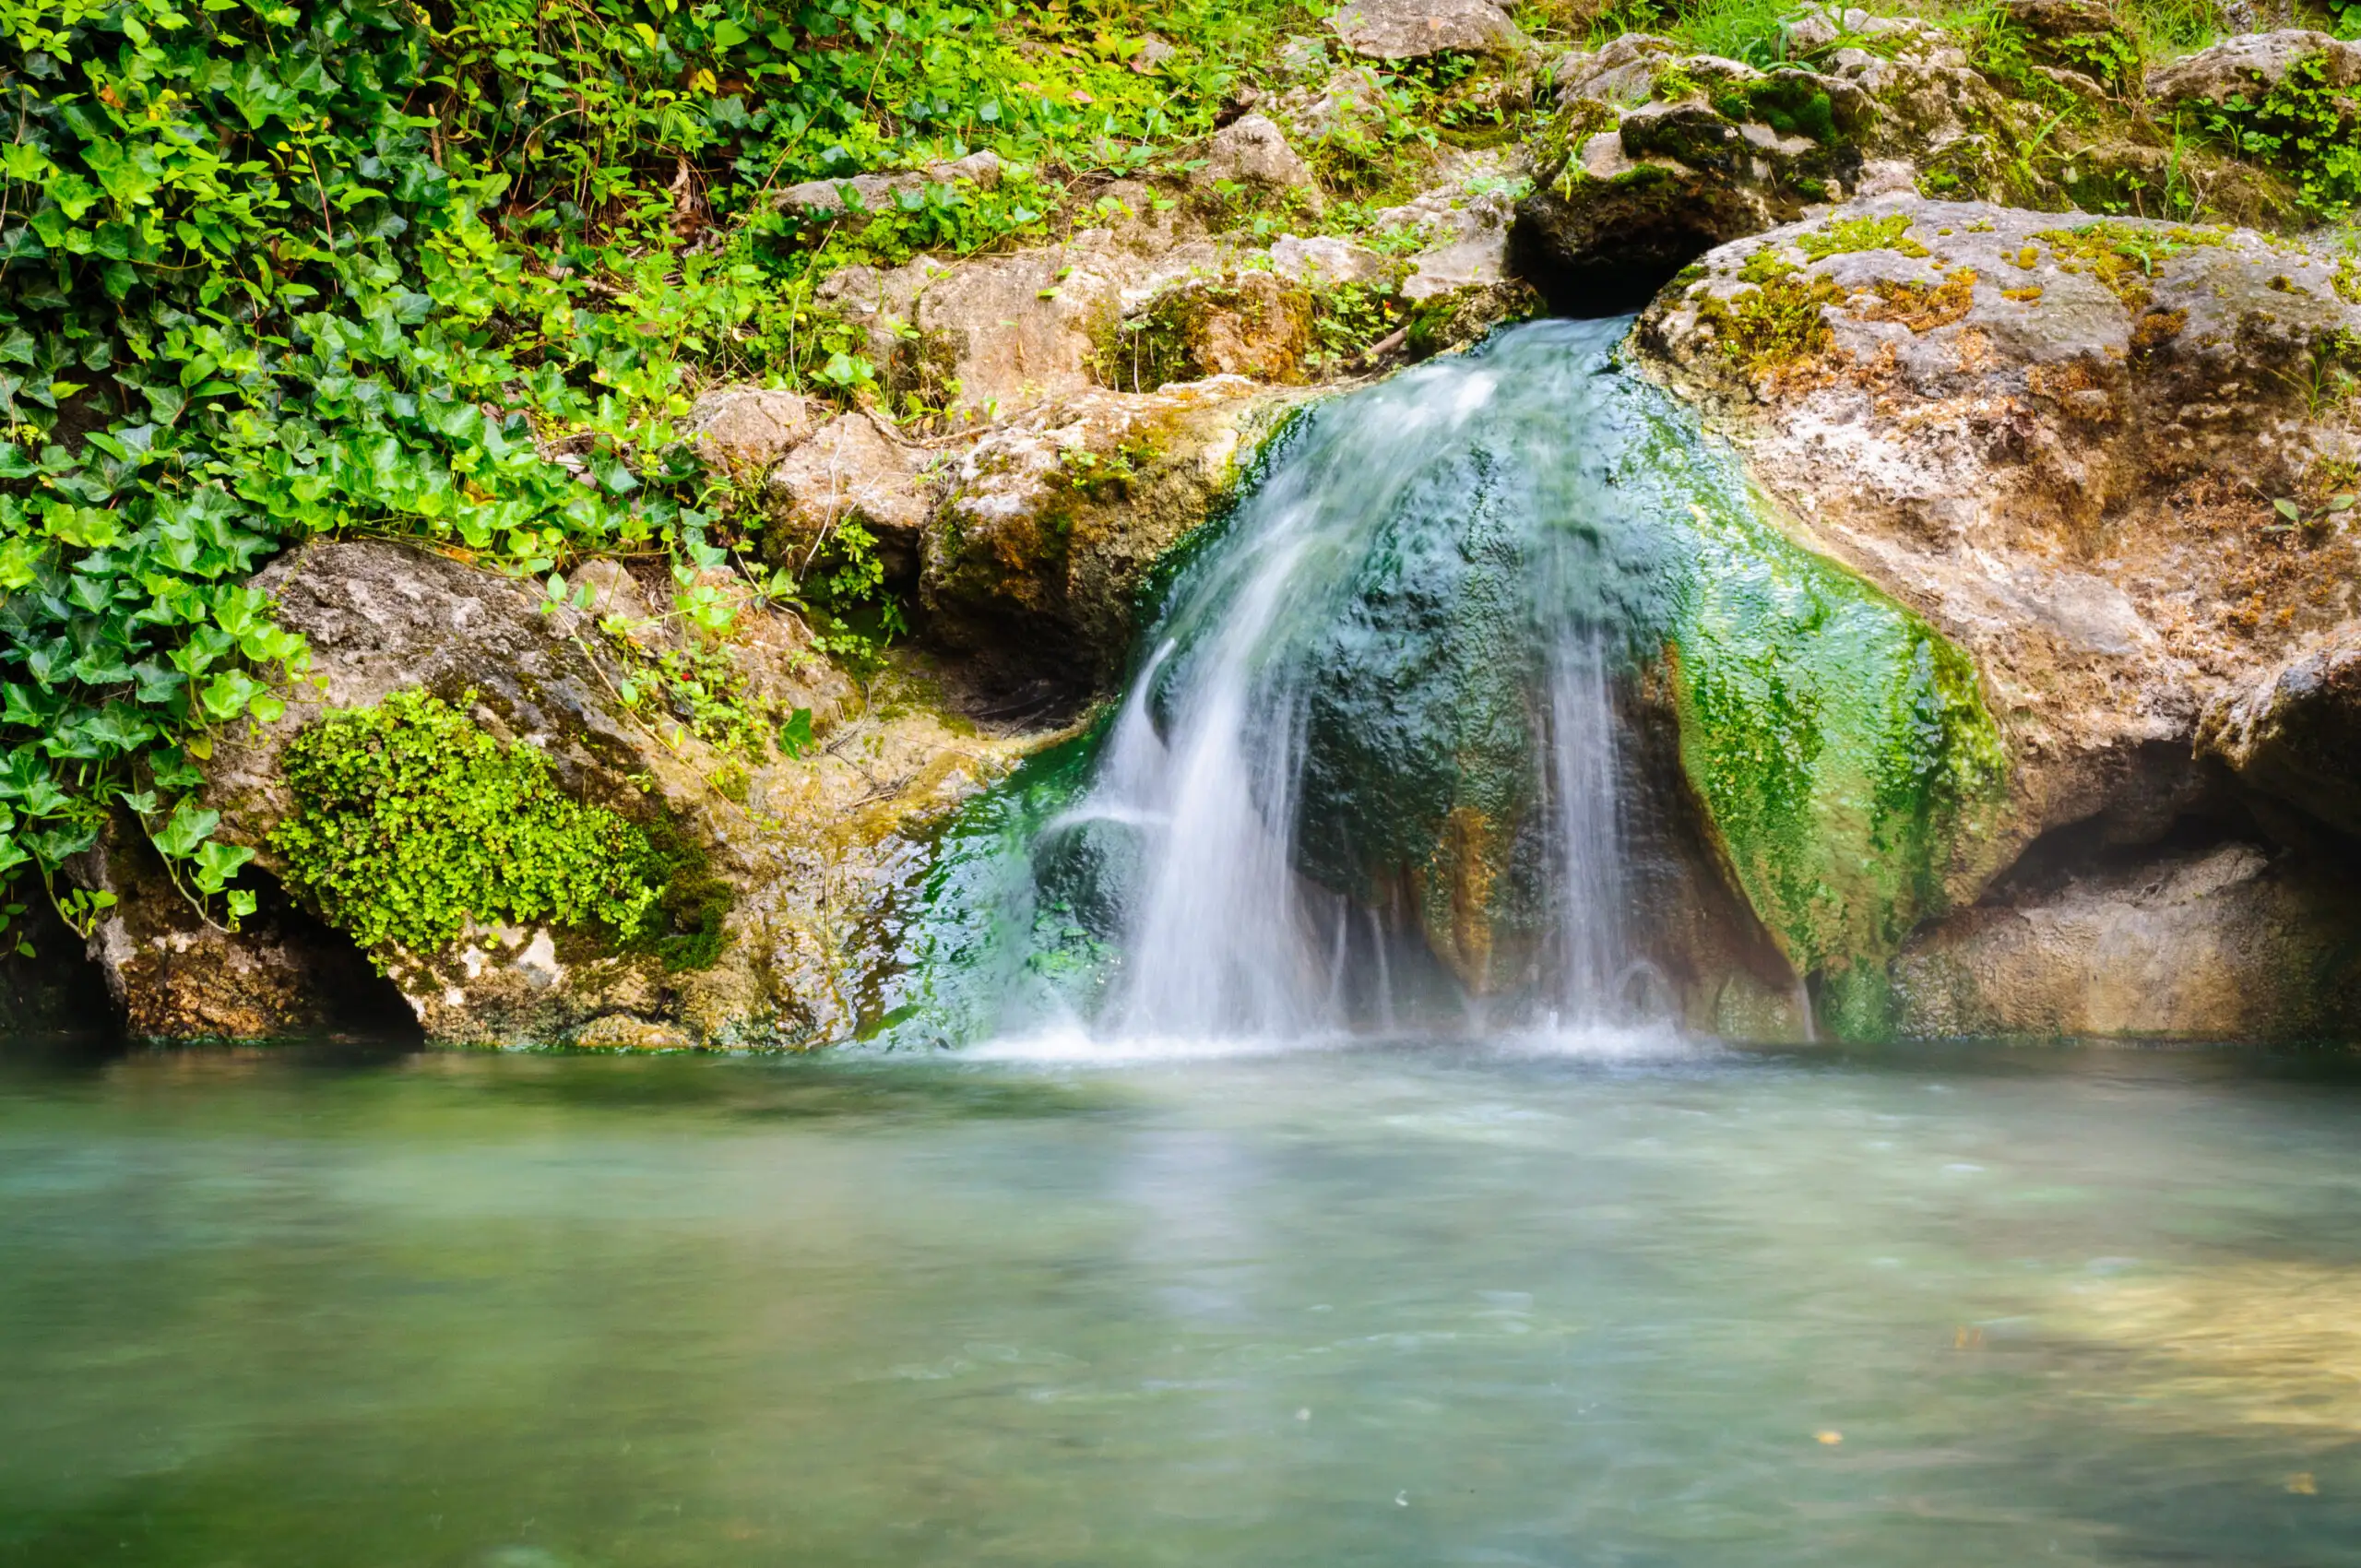 Waterfall at Hot Springs National Park; Courtesy Zack Frank/Shutterstock